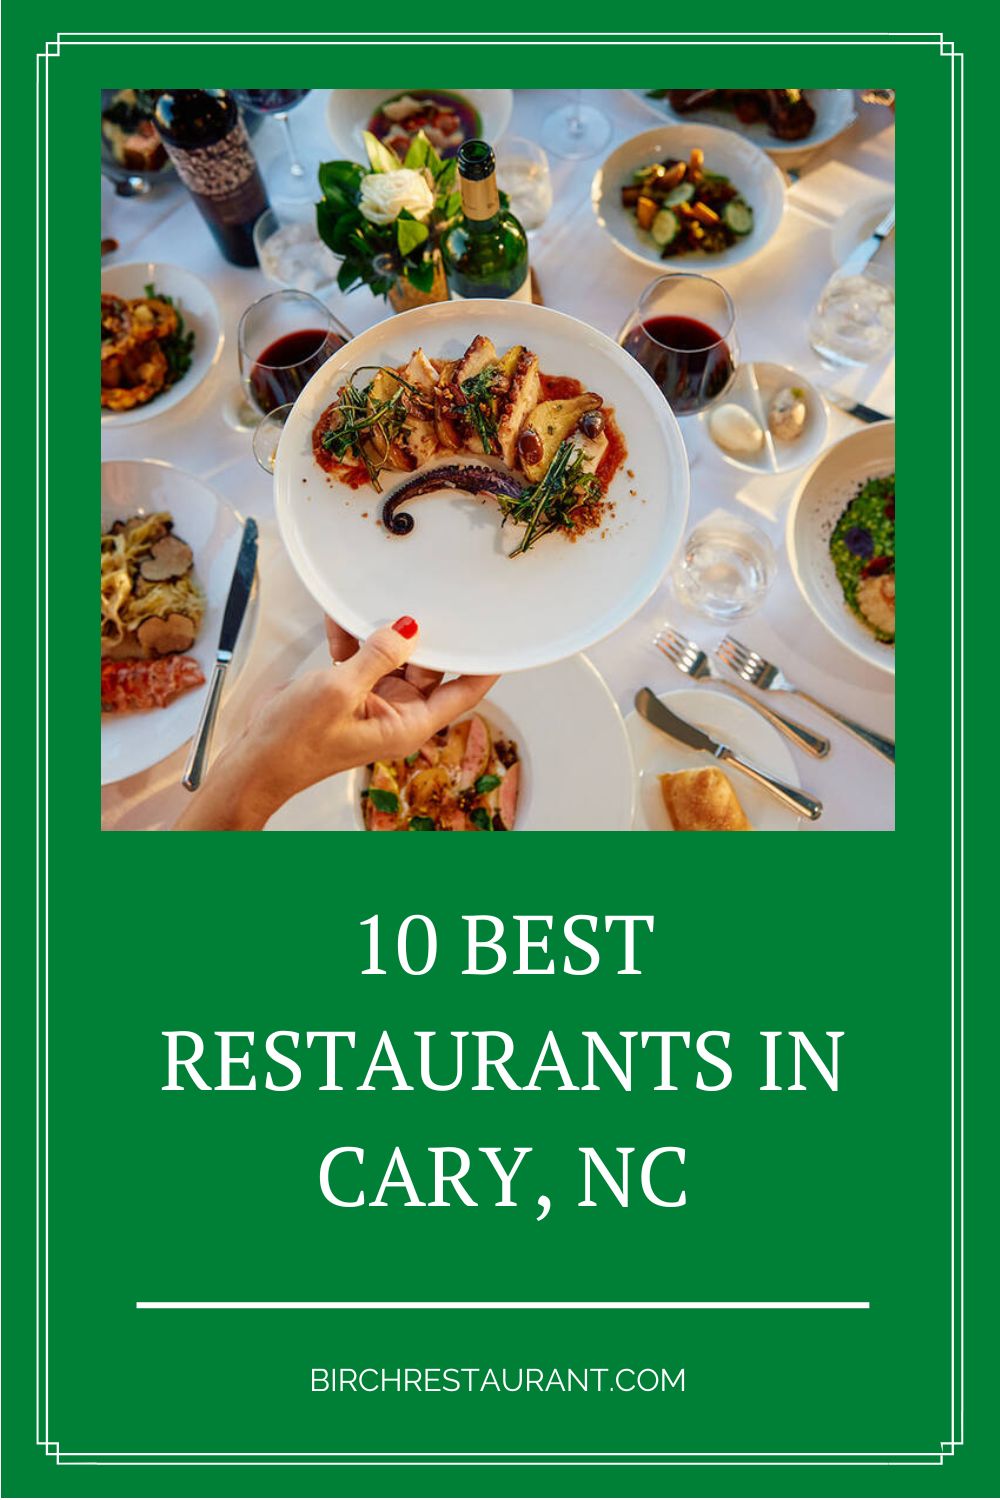 Best Restaurants in Cary